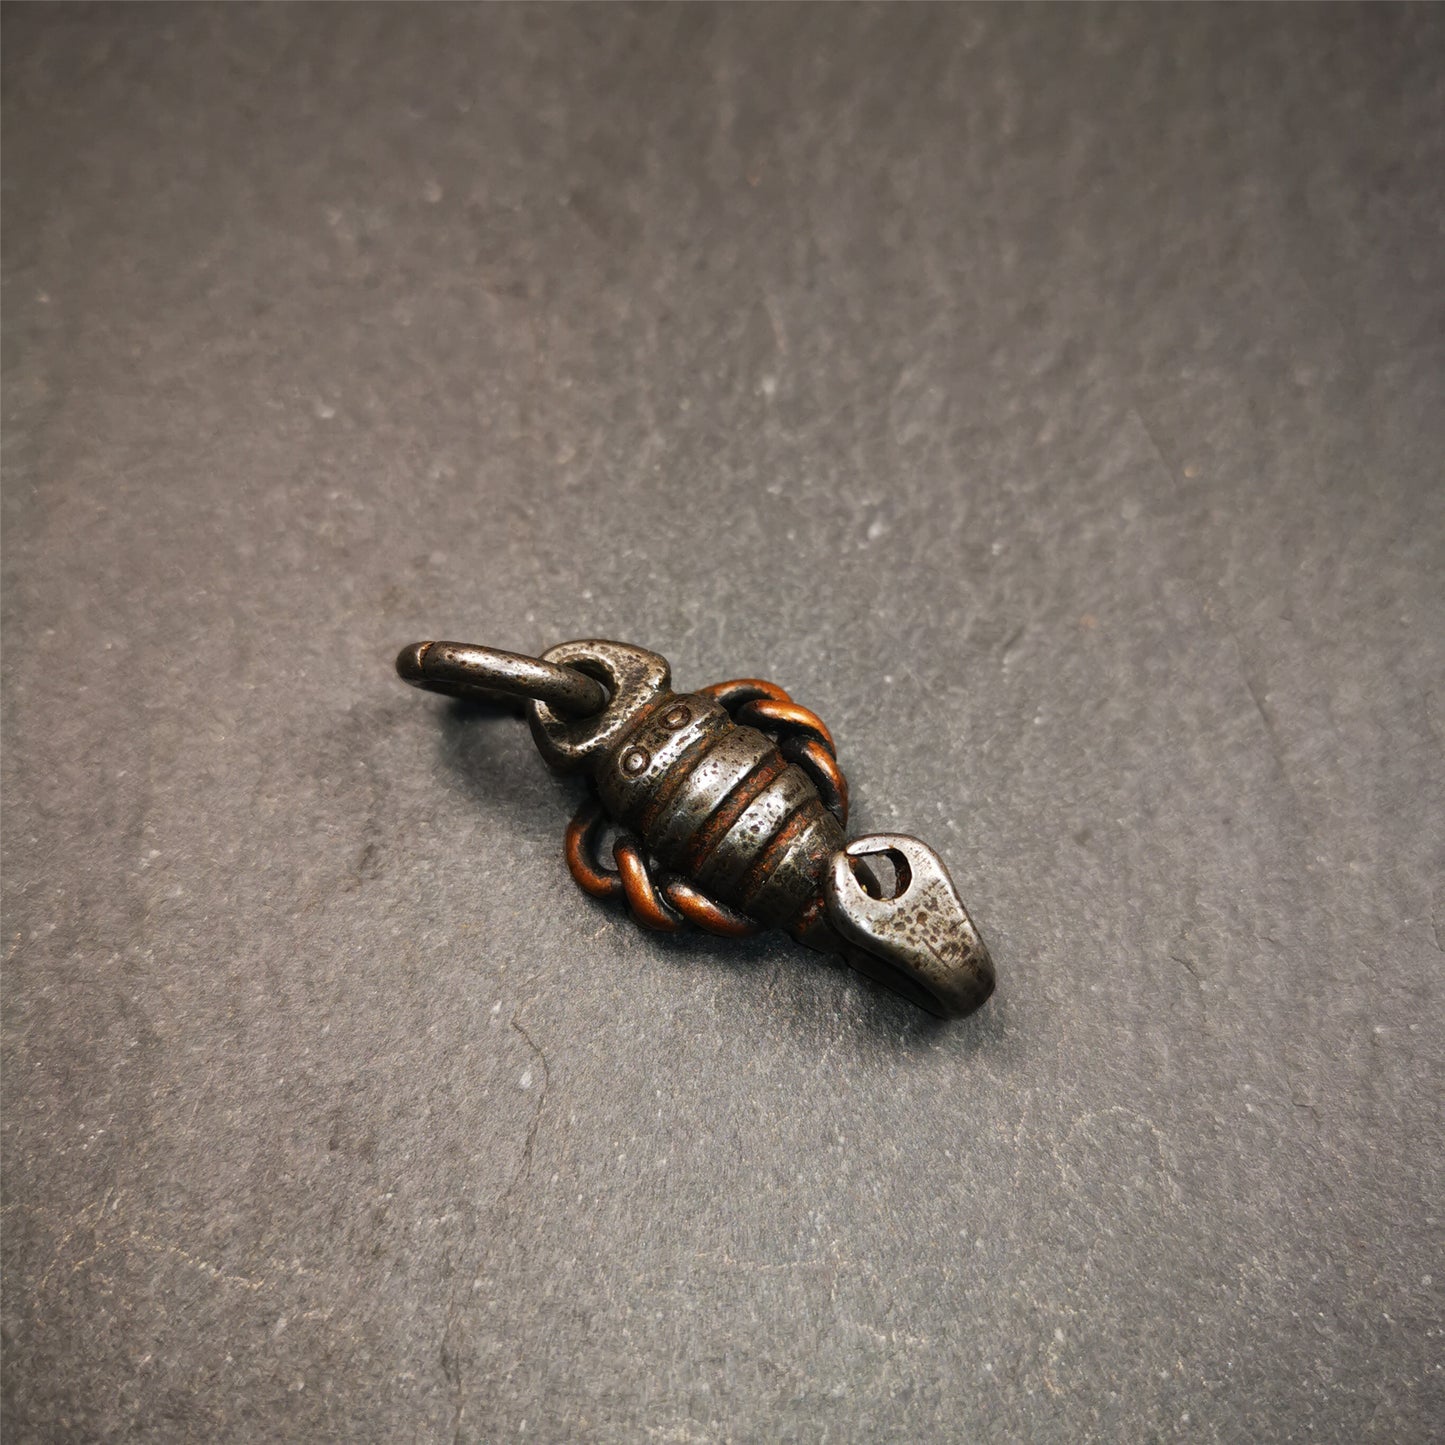 This scorpion amulet is made by Tibetan craftsmen in Hepo Township, Baiyu County, the birthplace of the famous Tibetan handicrafts. It is made of cold iron and copper,black color, size is 1.26 × 0.67 inches.The body is cold iron,and the legs are copper wire. You can make it into a necklace, or a keychain, or just put it in your shrine.